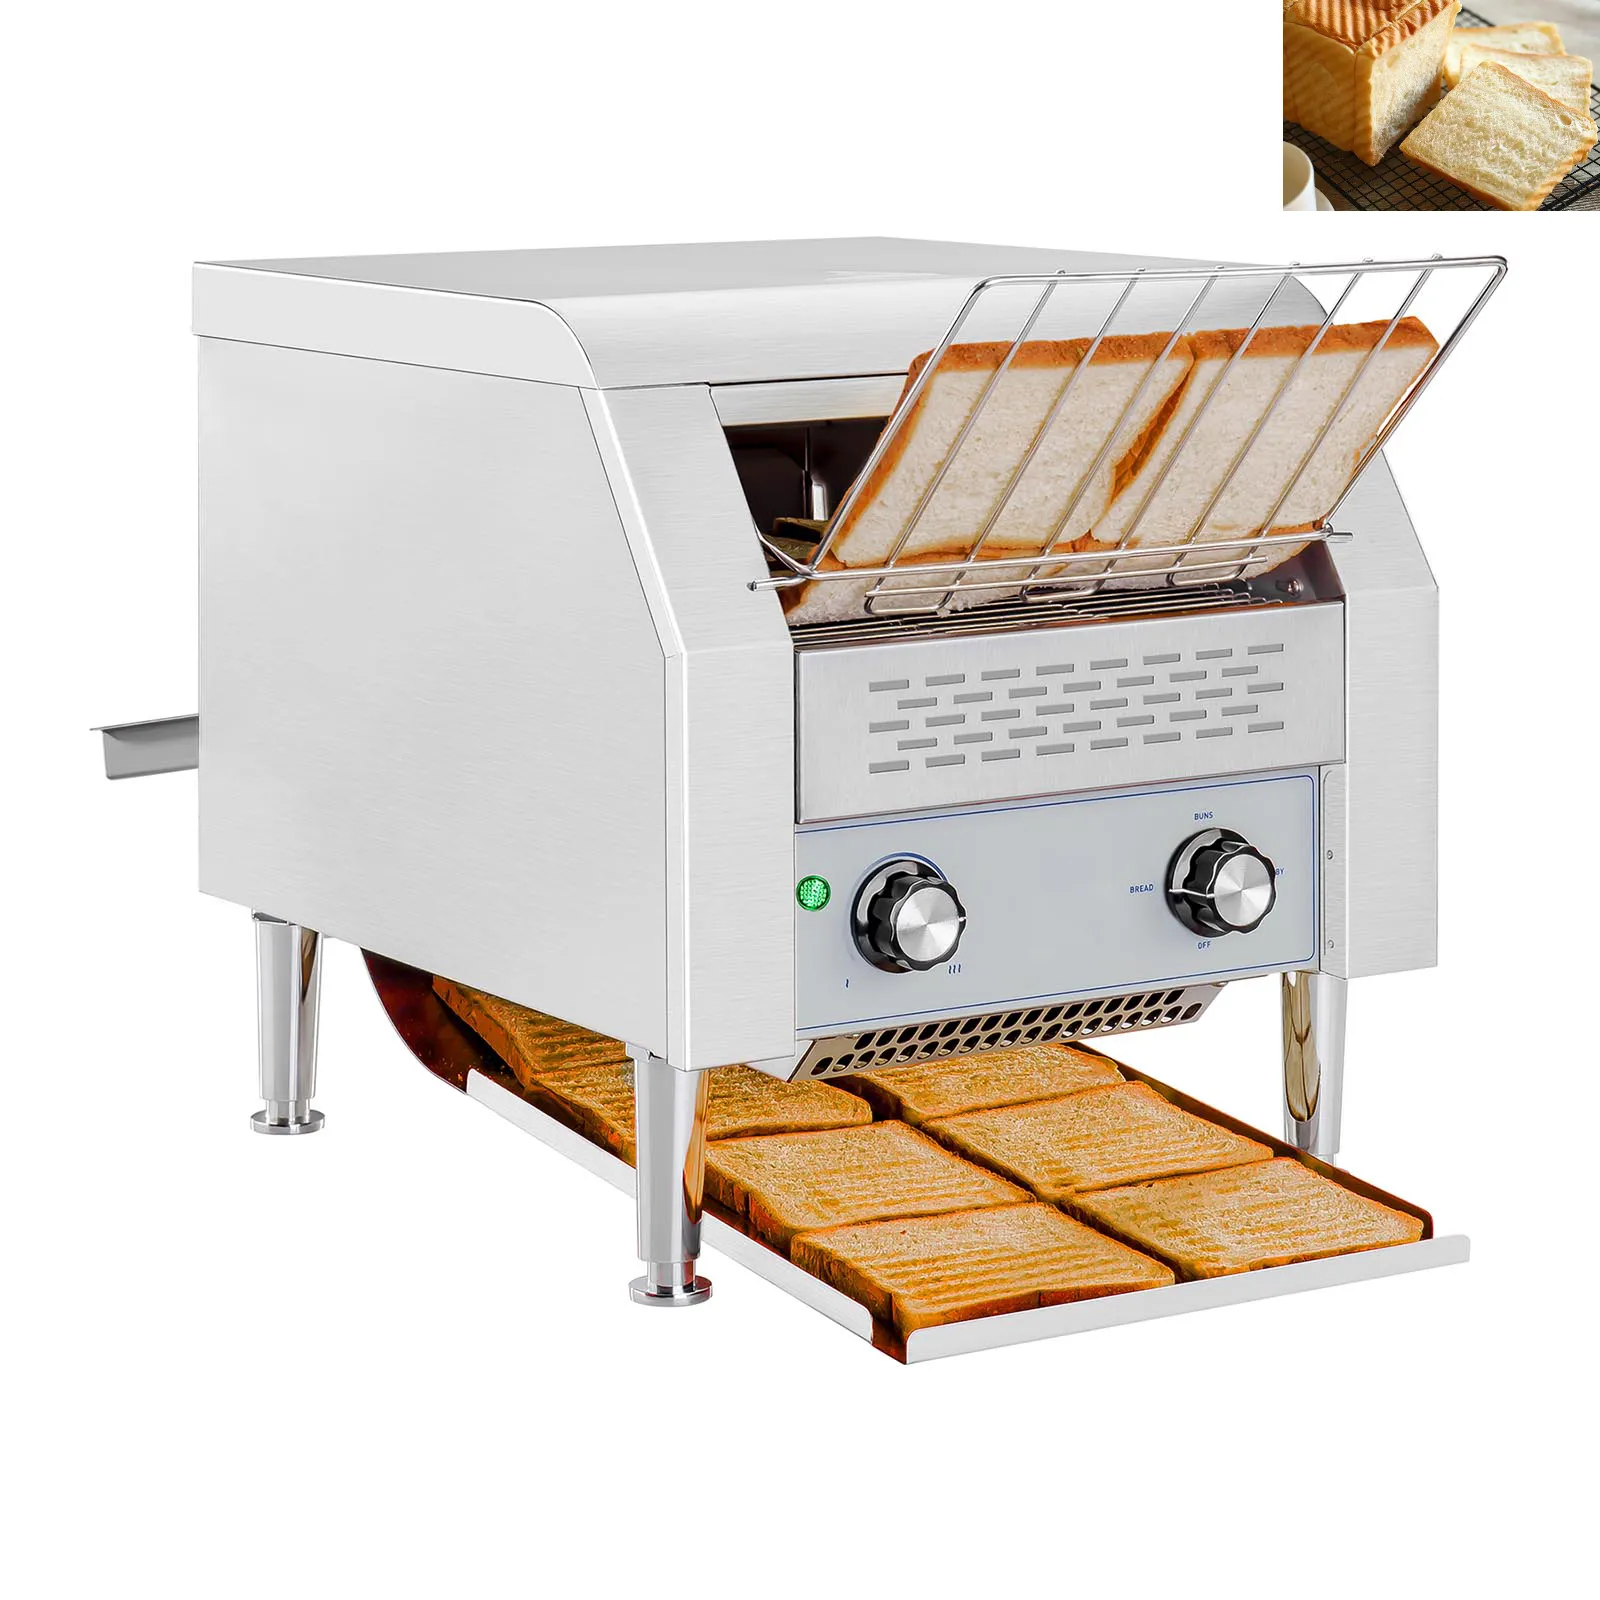 Restaurant Breakfast Kitchen Equipment toaster machine Electric Toaster Stainless Steel Commercial Sandwich Bread Oven